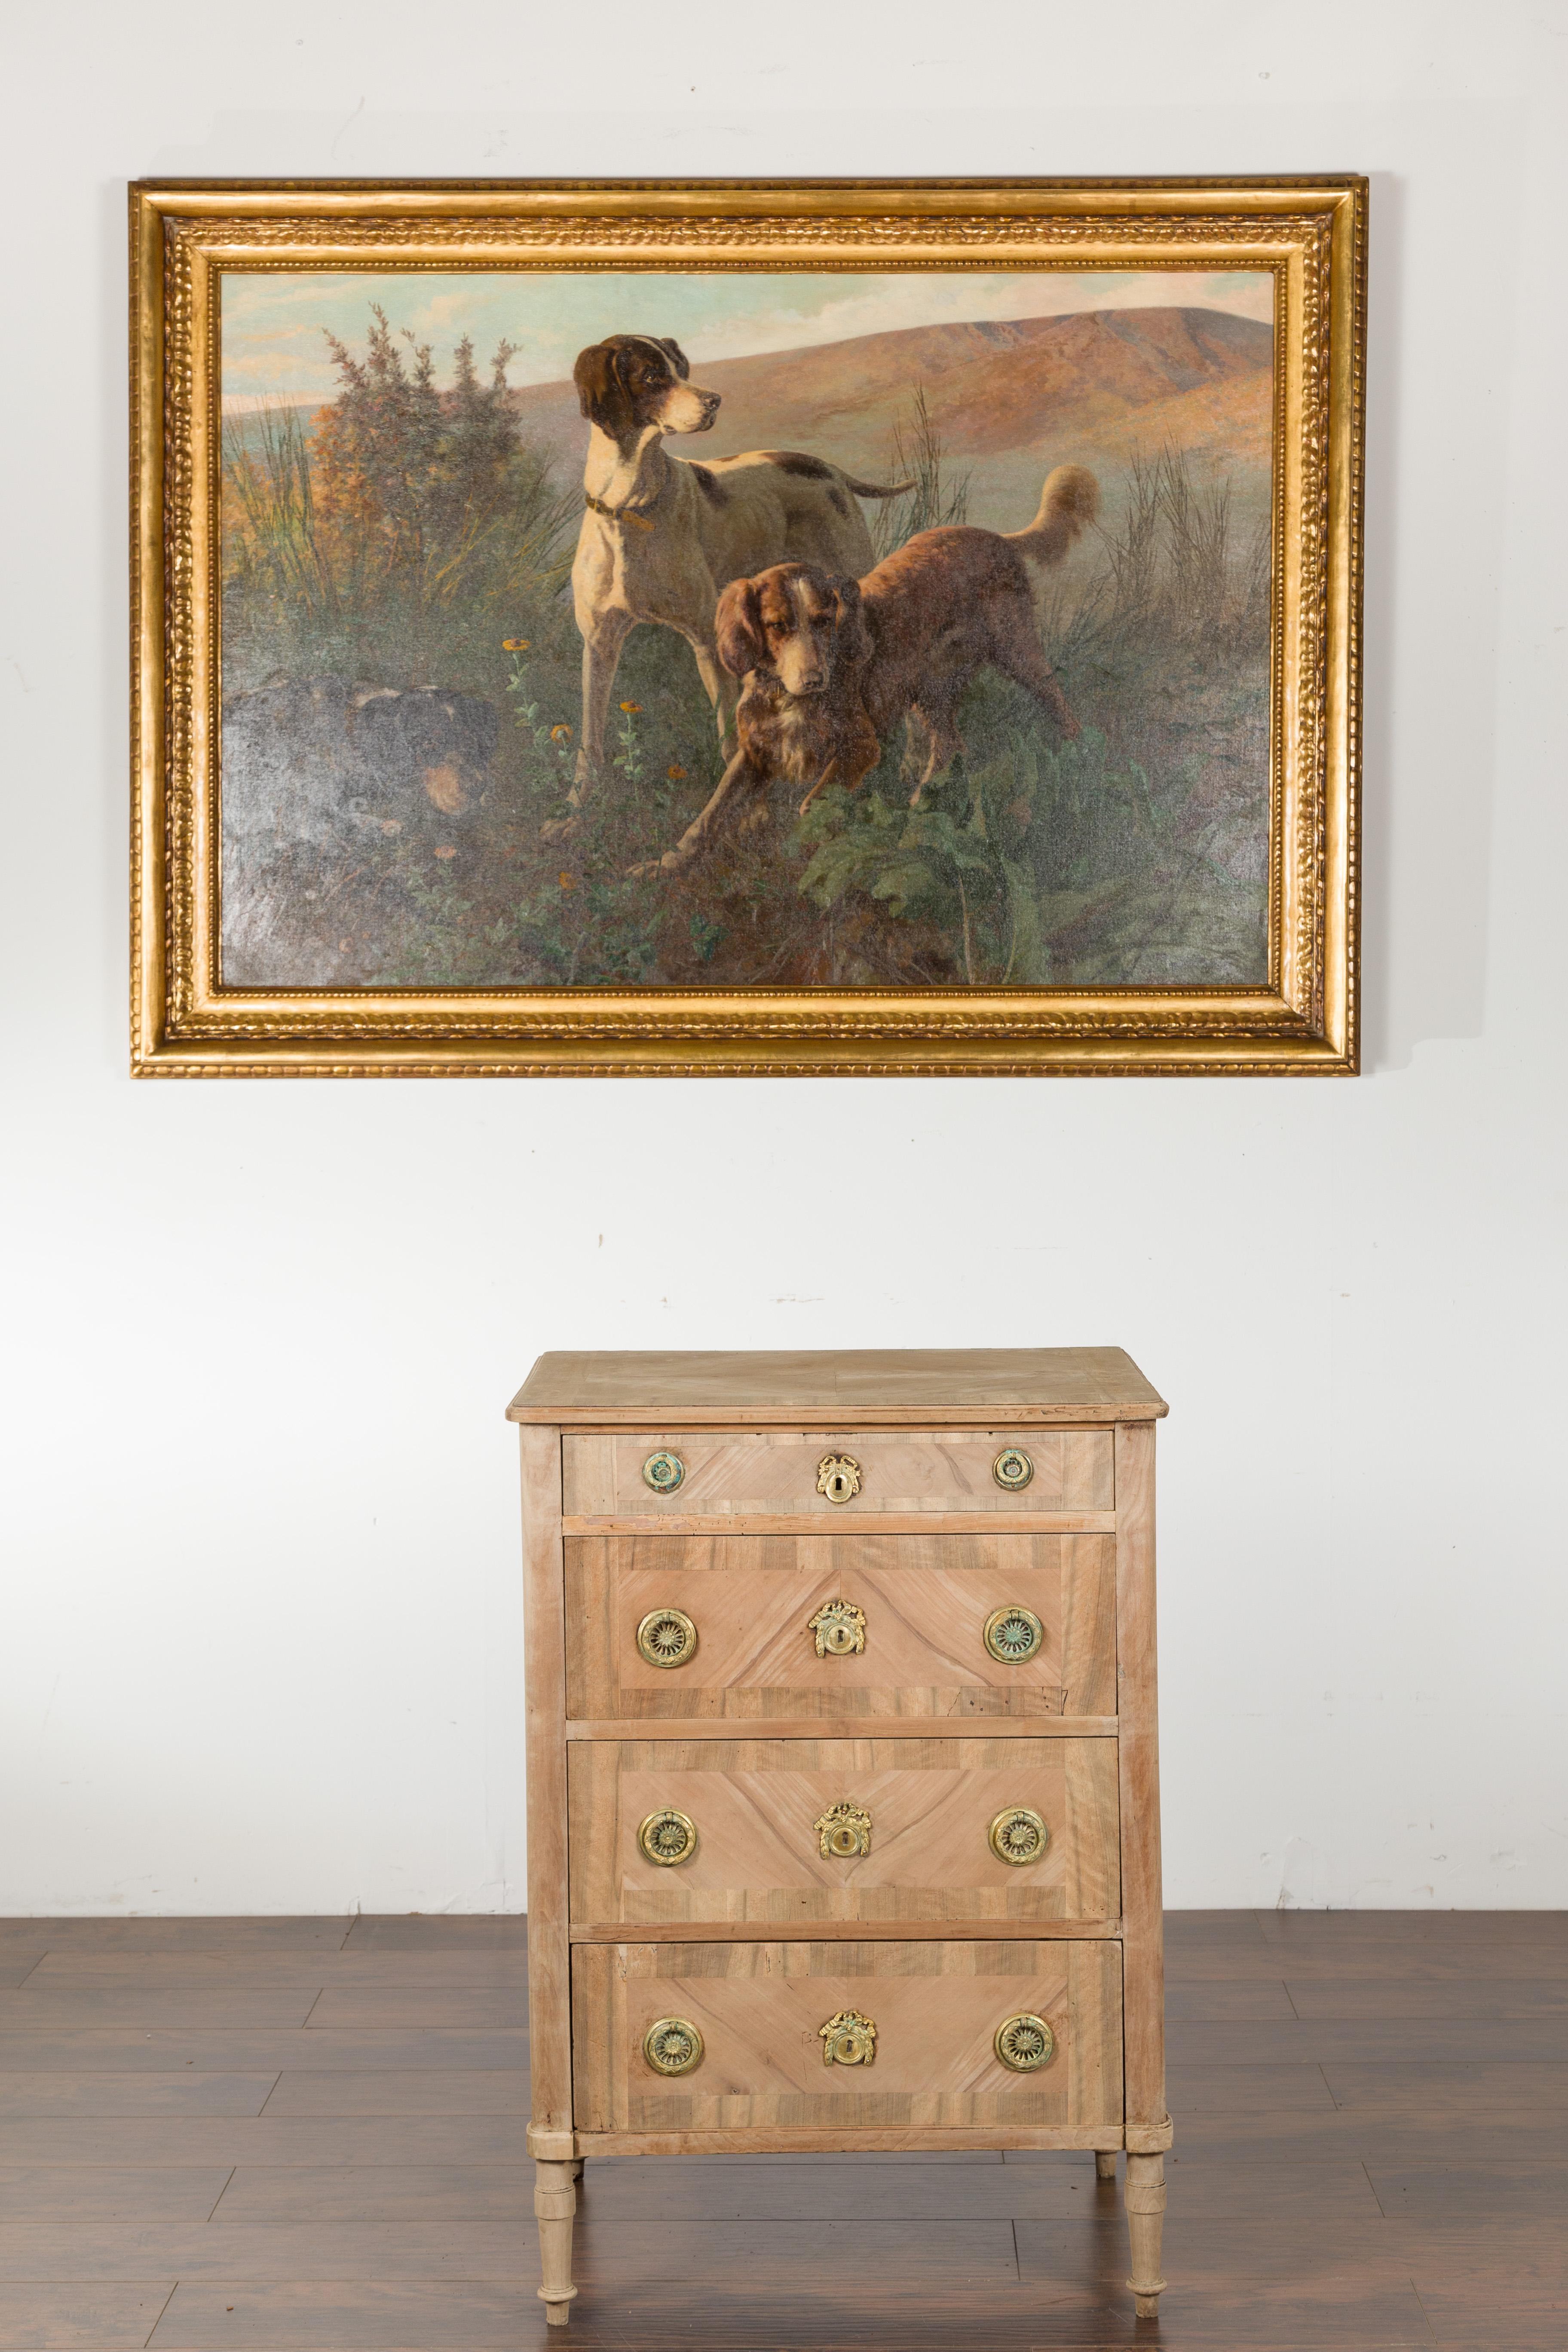 An Italian bleached walnut tall commode from the early 19th century, with four drawers and bleached walnut veneer. Created in Italy during the first quarter of the 19th century, this tall chest features a rectangular top with quarter veneer and